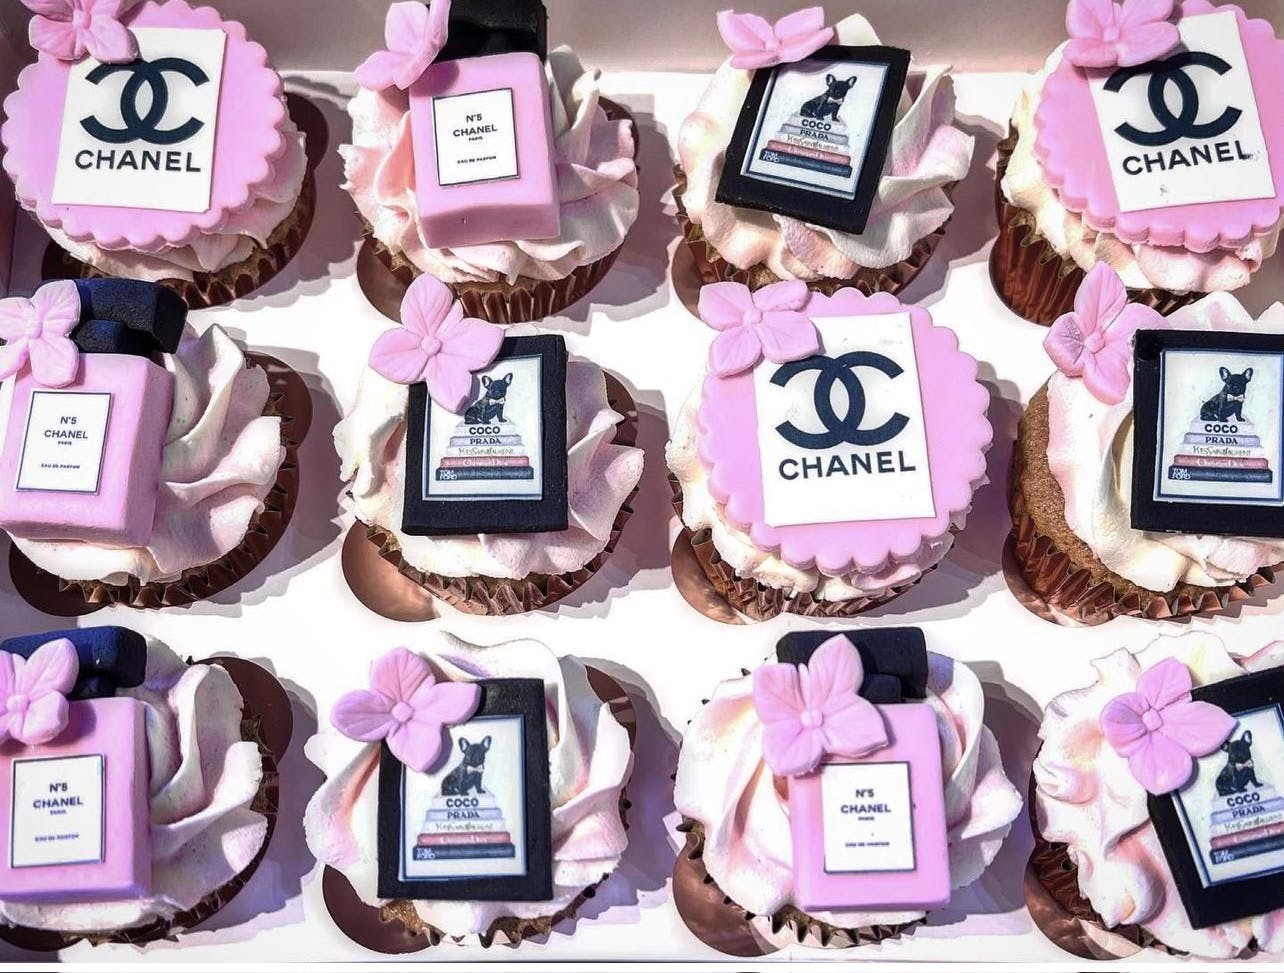 Cupcakes with Chanel Paris perfume bottles made out of fondant on top